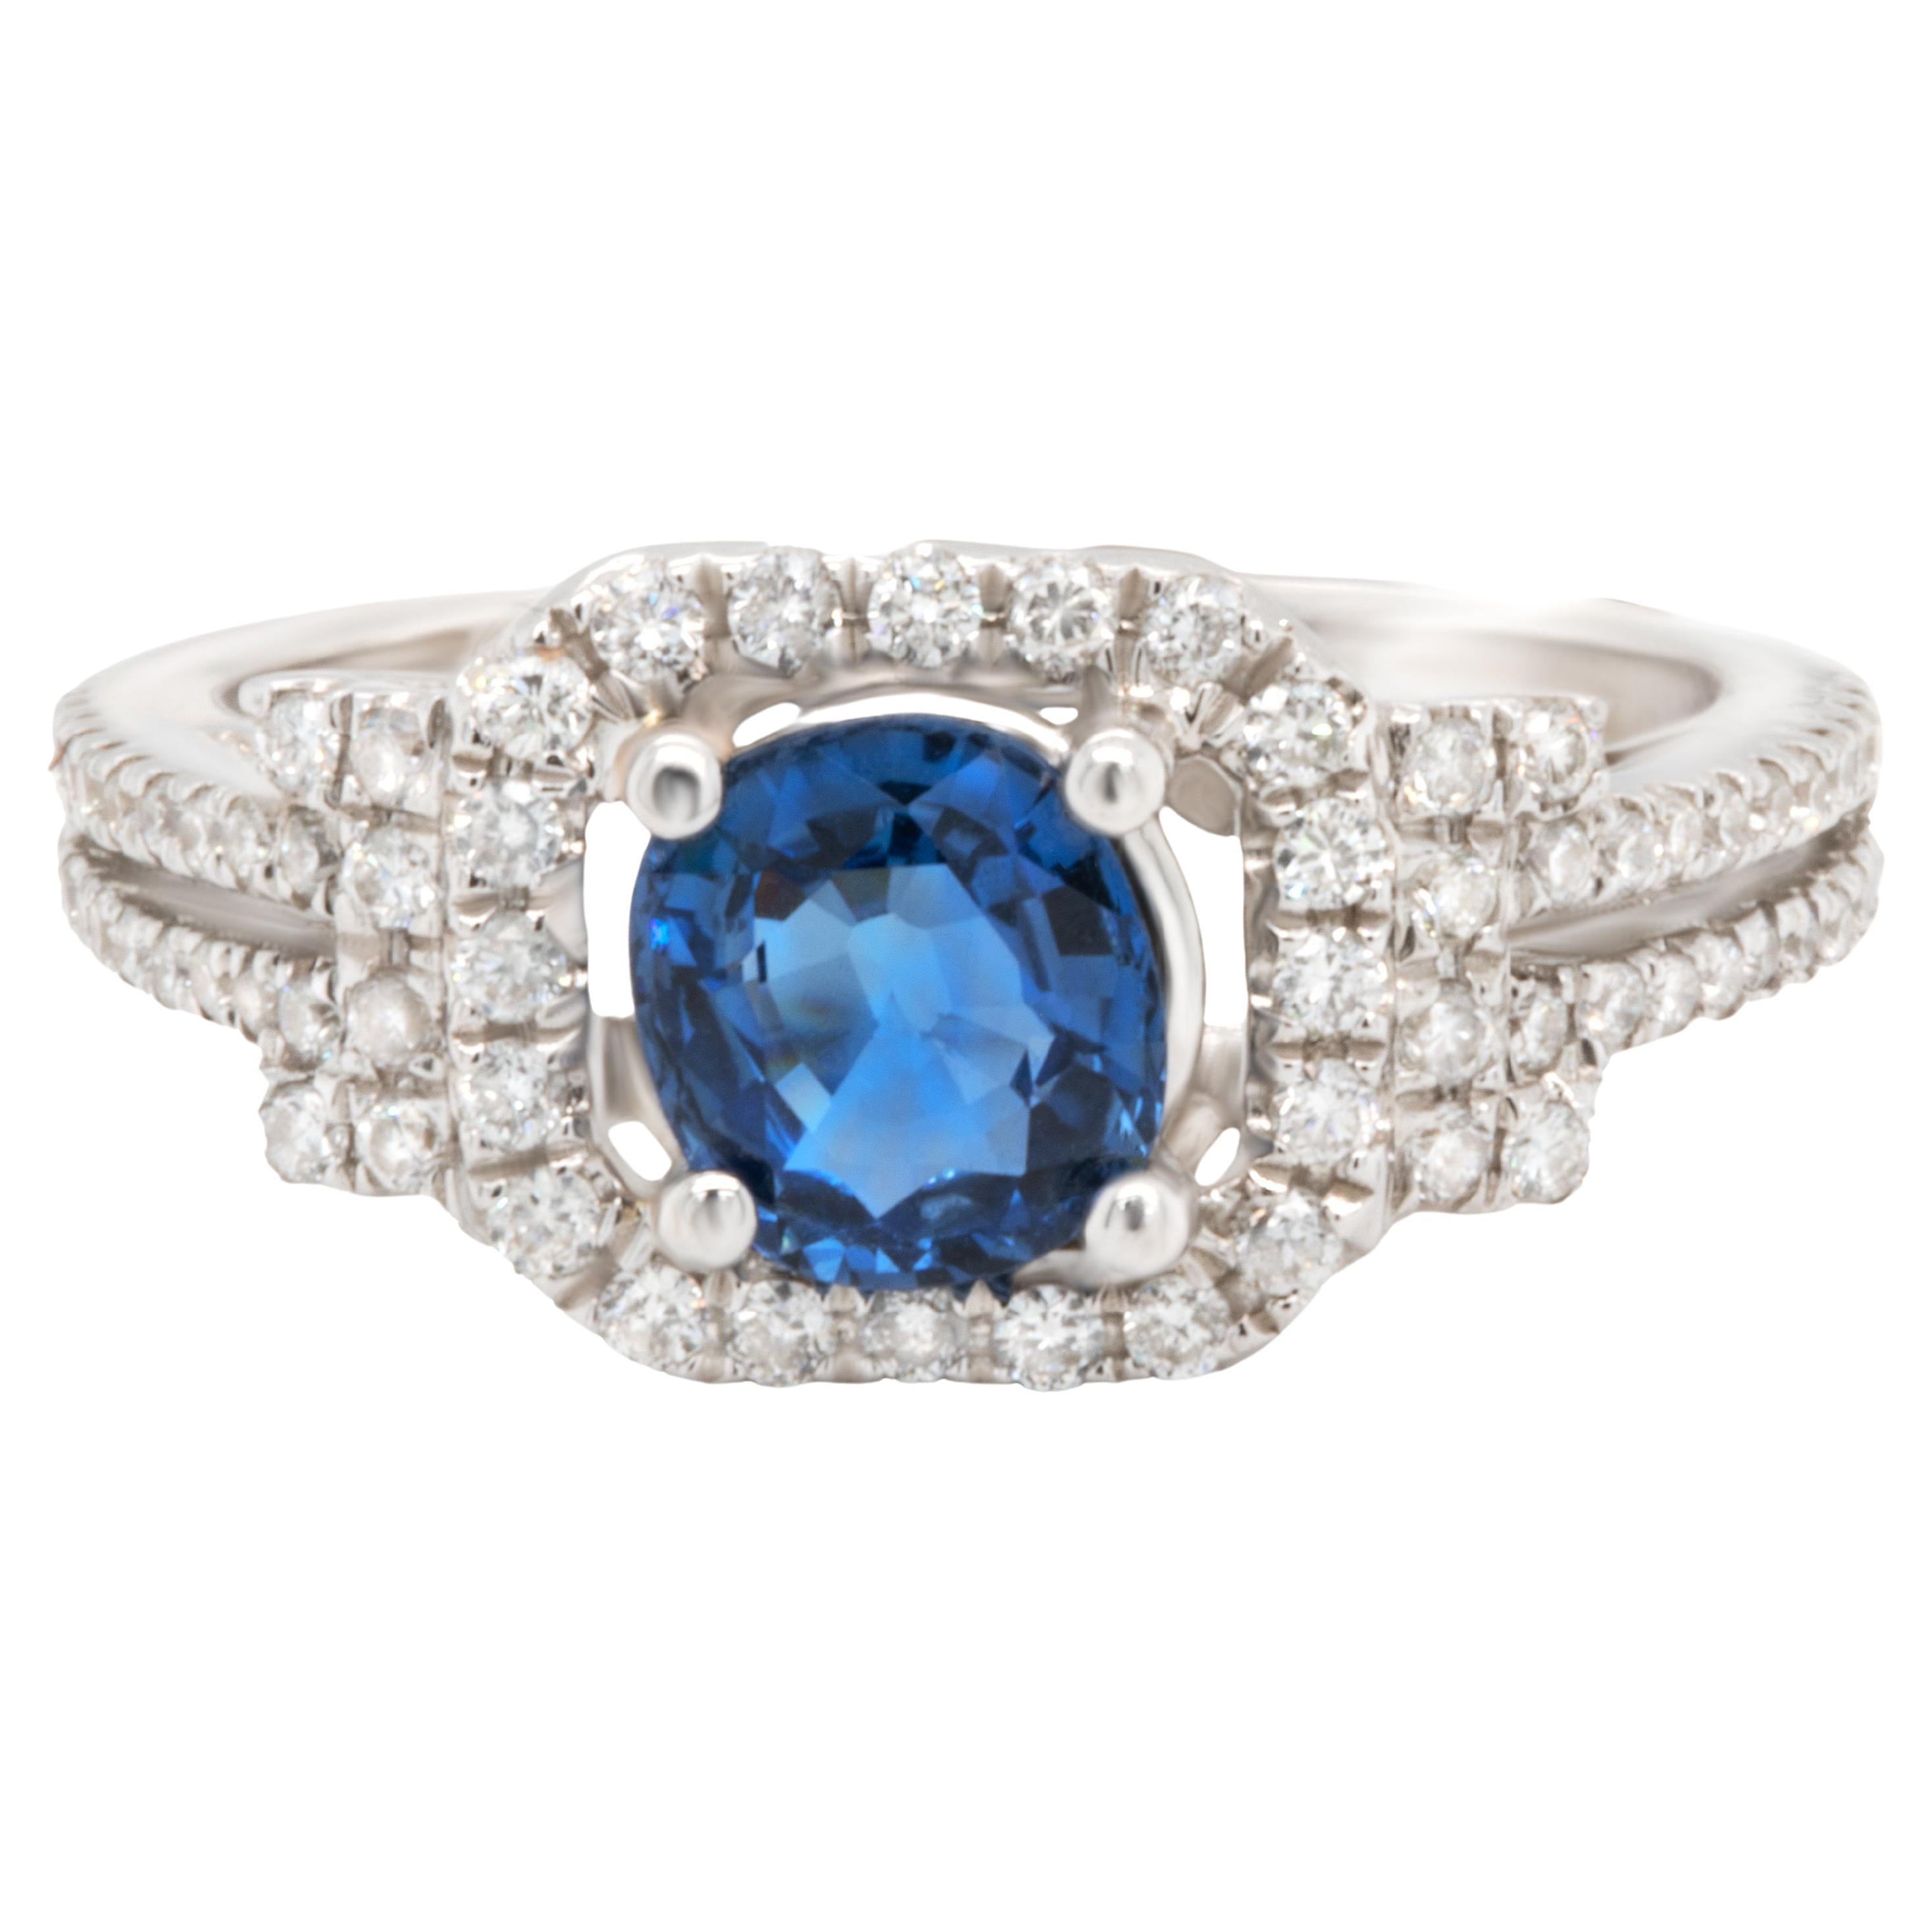 Sapphire Ring With Diamonds 1.56 Carats 18K White Gold For Sale